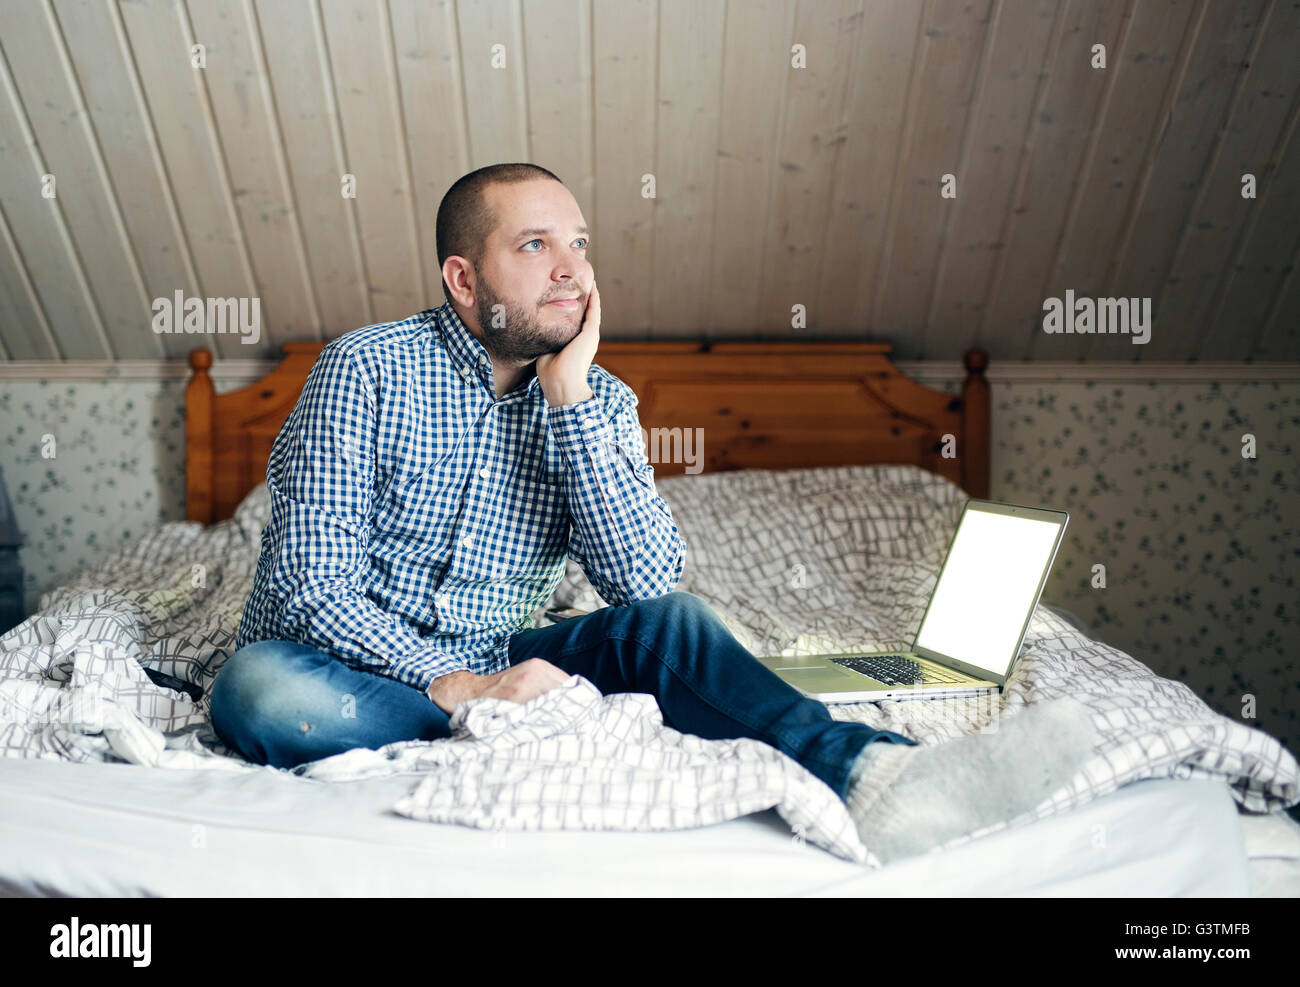 Finland, Man sitting on bed and daydreaming Stock Photo